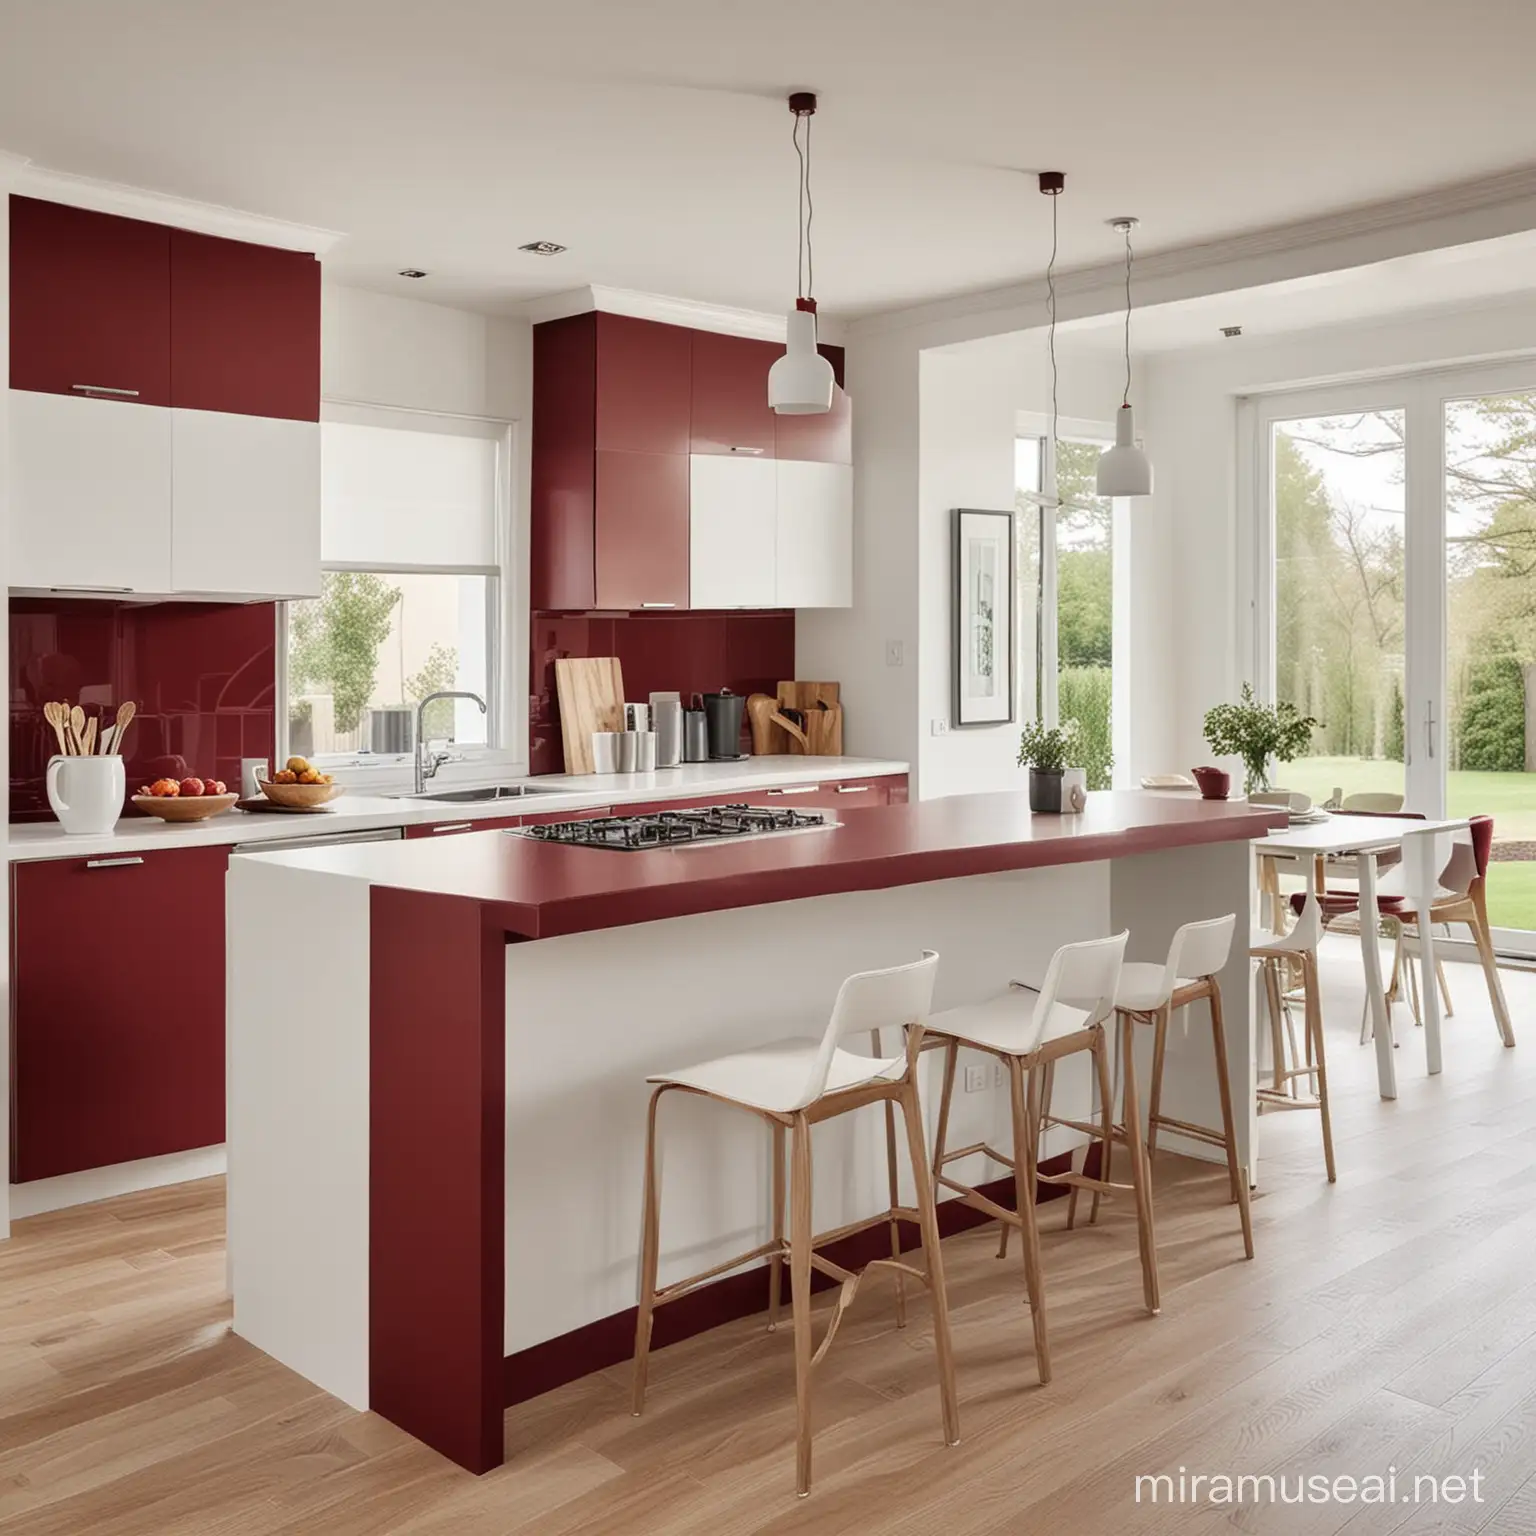 Modern UShaped Kitchen Design in Maroon and White